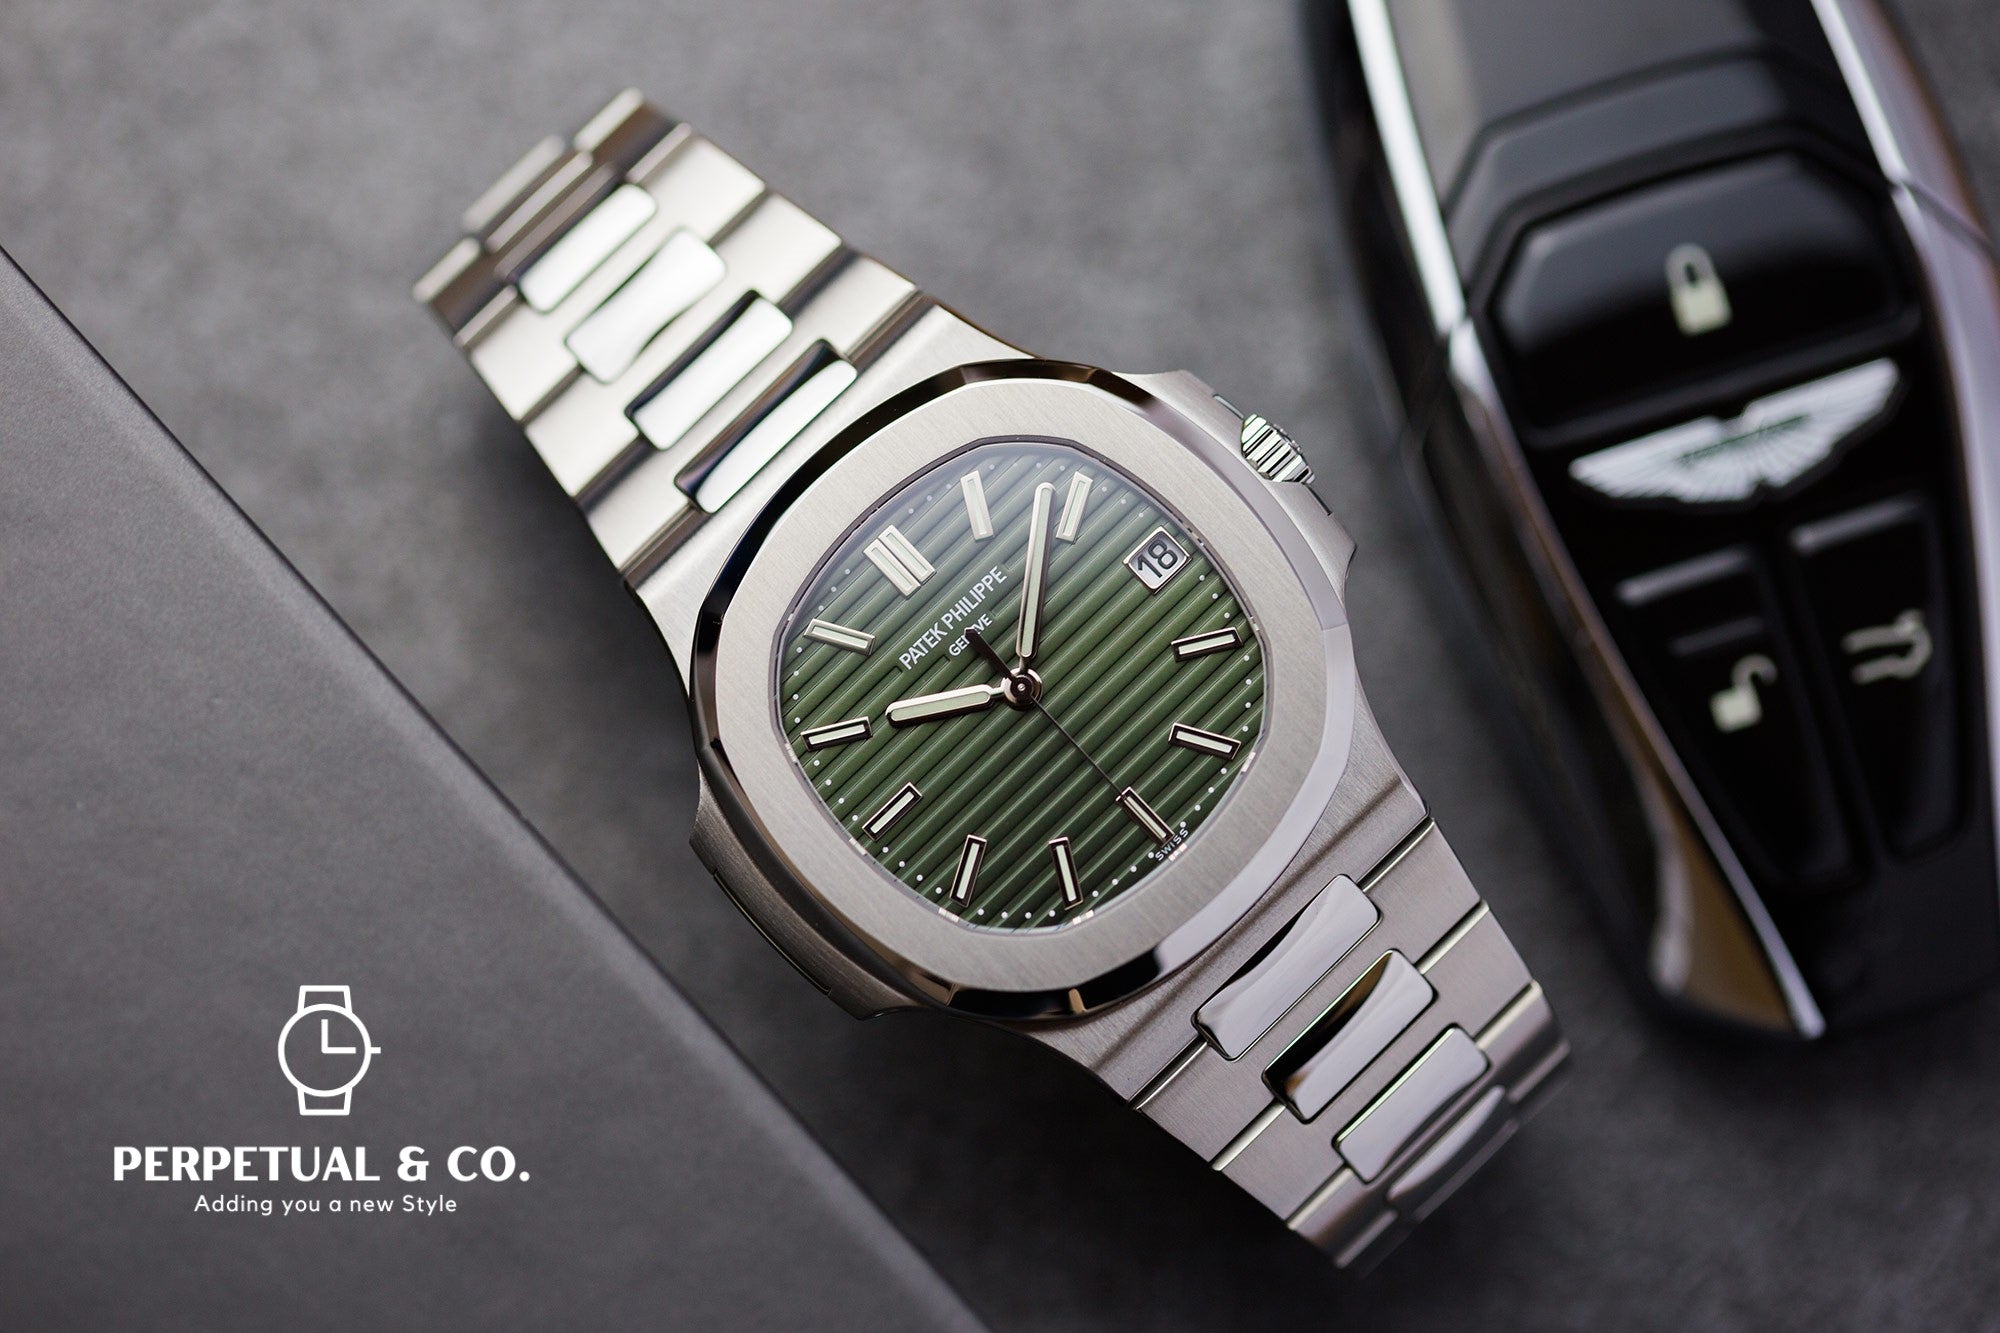 Watch Journal - Patek Philippe Nautilus 5711/1a-014 Olive Green Dial